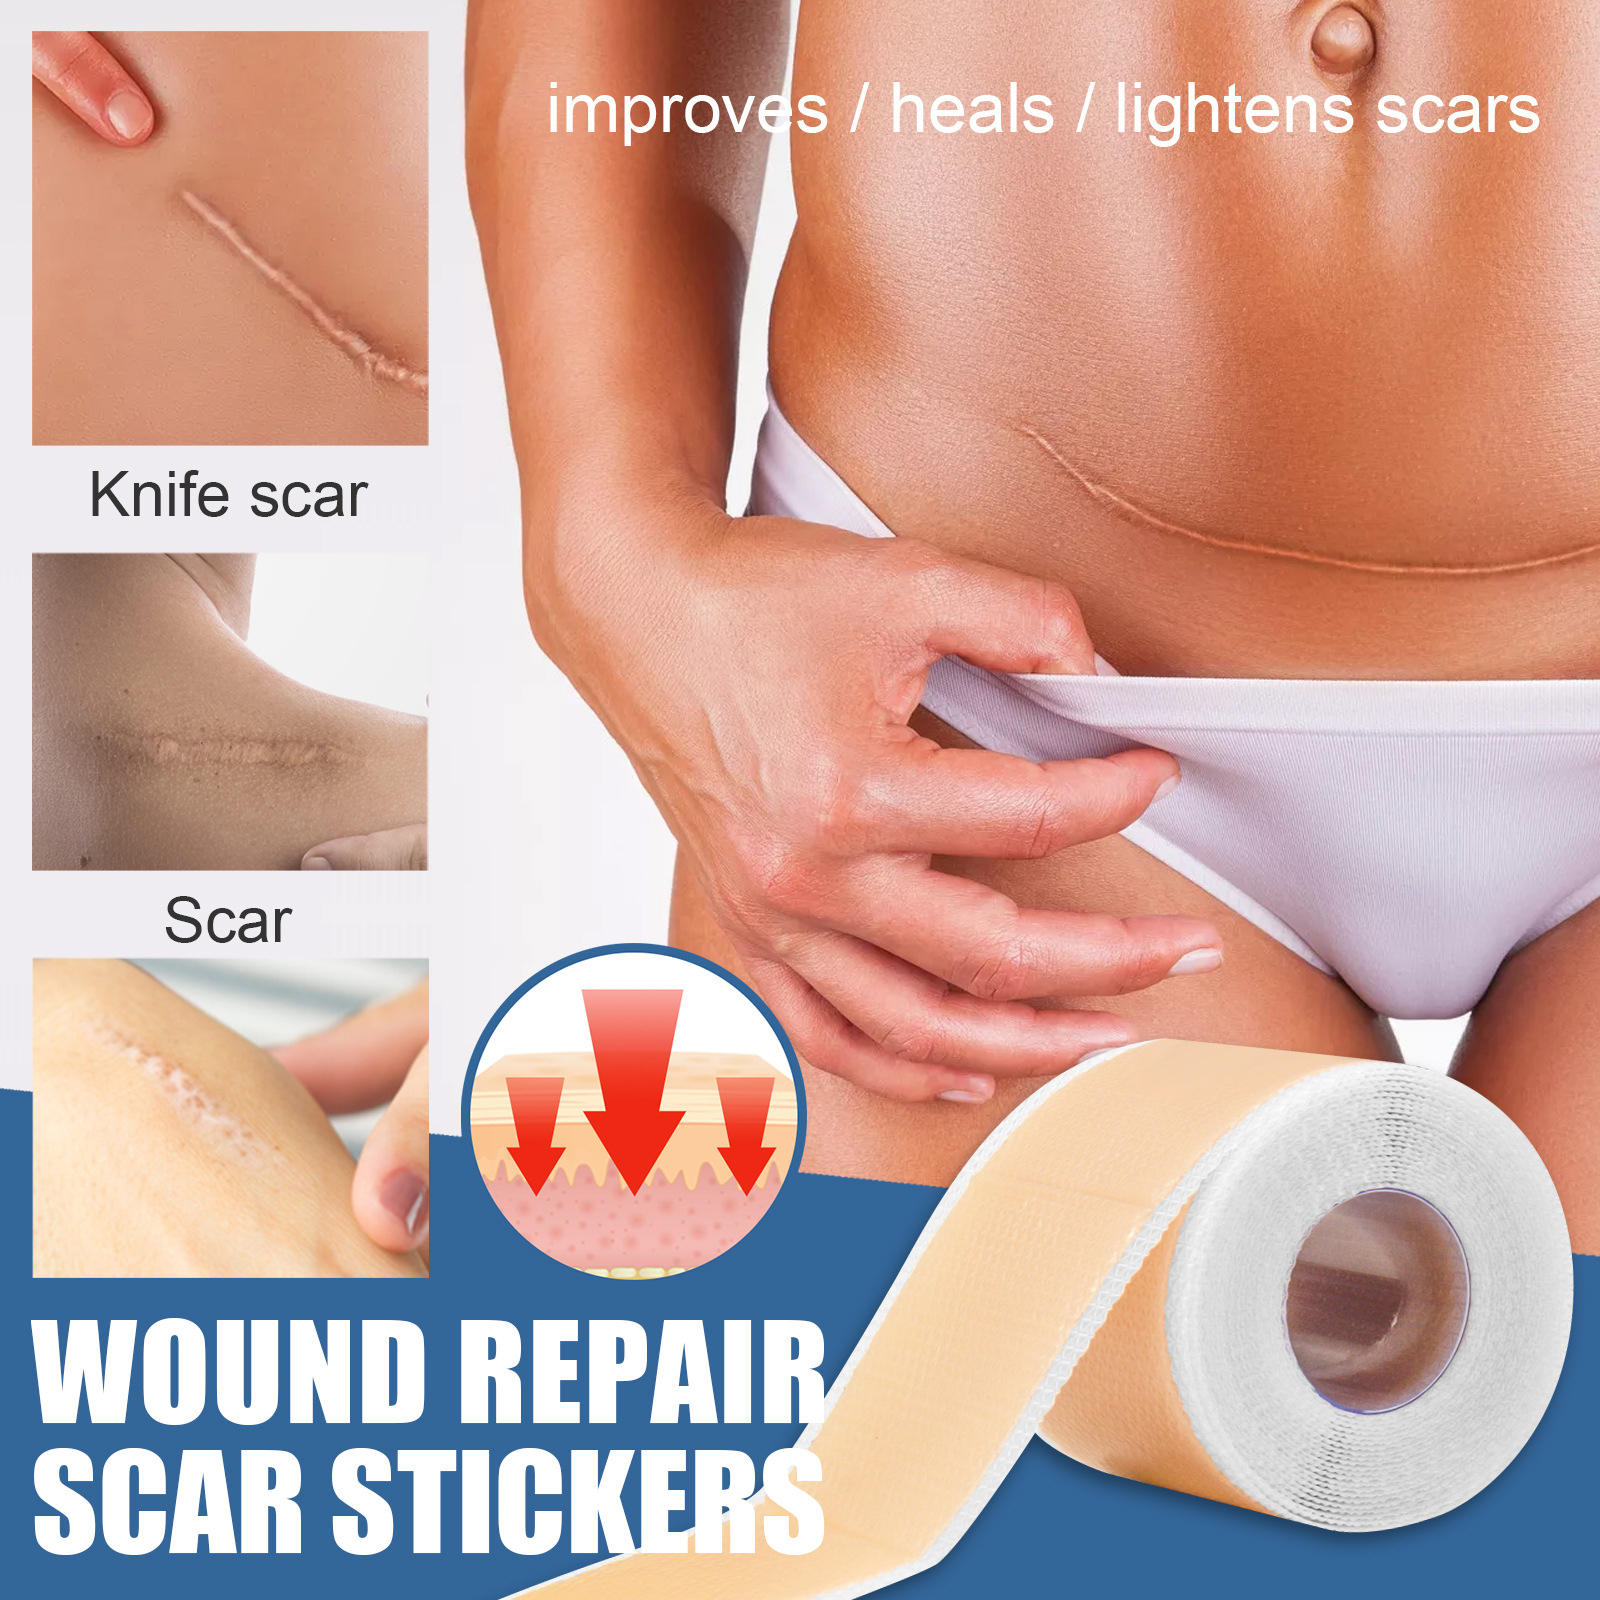 Scars Sheets Treatment Tapes Highly Comfortable Medical Easy Removal Soft Silicone Tape for C-Section Acne Wound Dressing Keloid